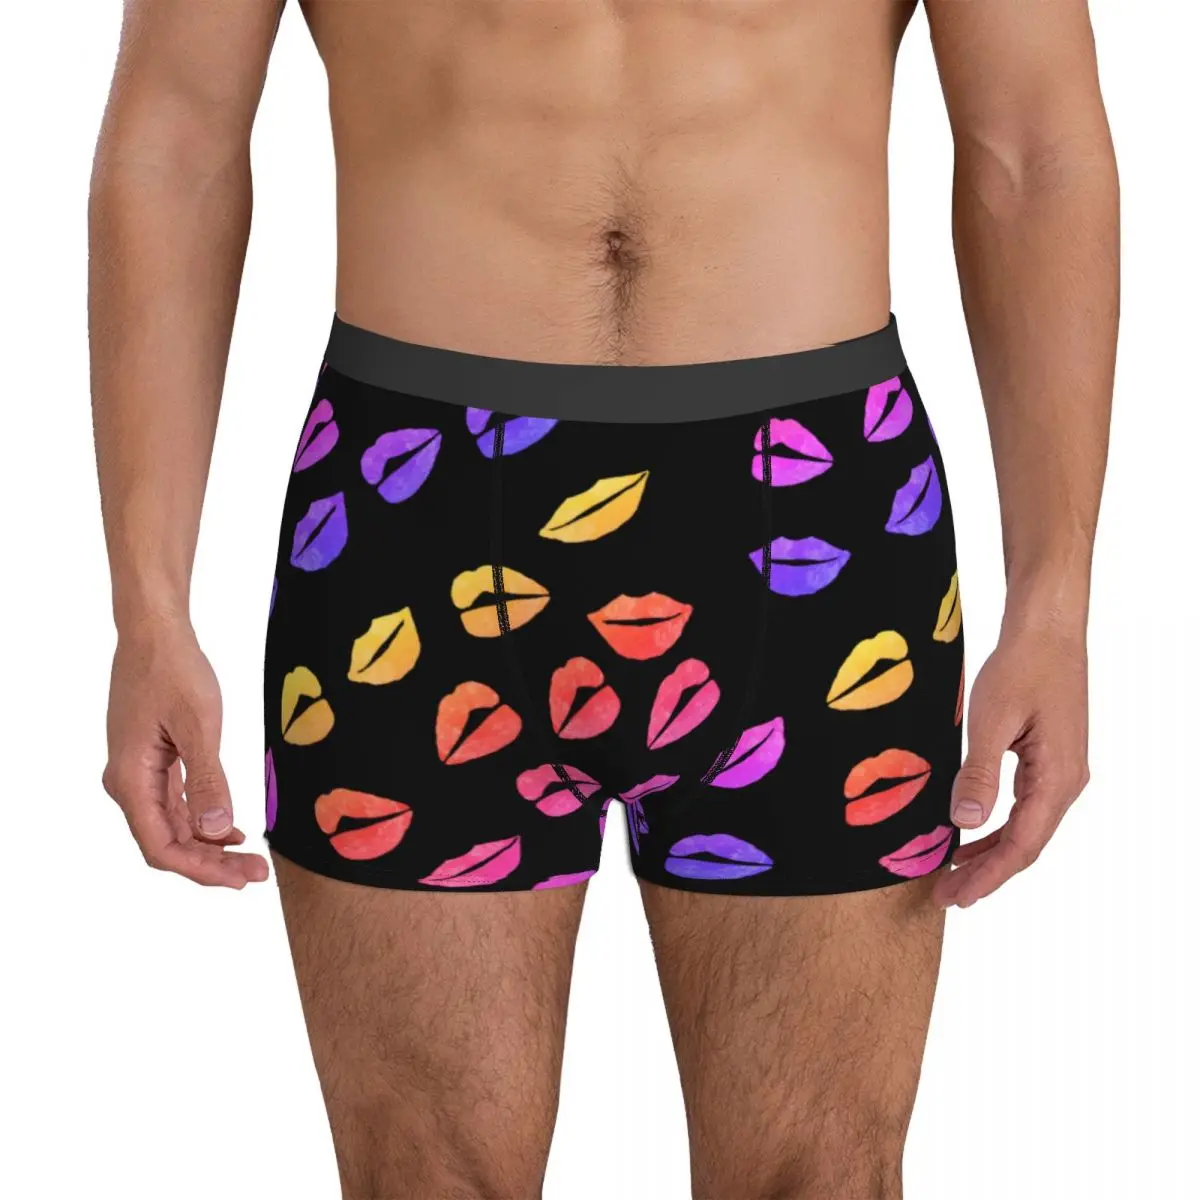 

Colorful Lips Underwear Pop Art Print Print Boxershorts High Quality Man Underpants Sexy Boxer Brief Gift Idea